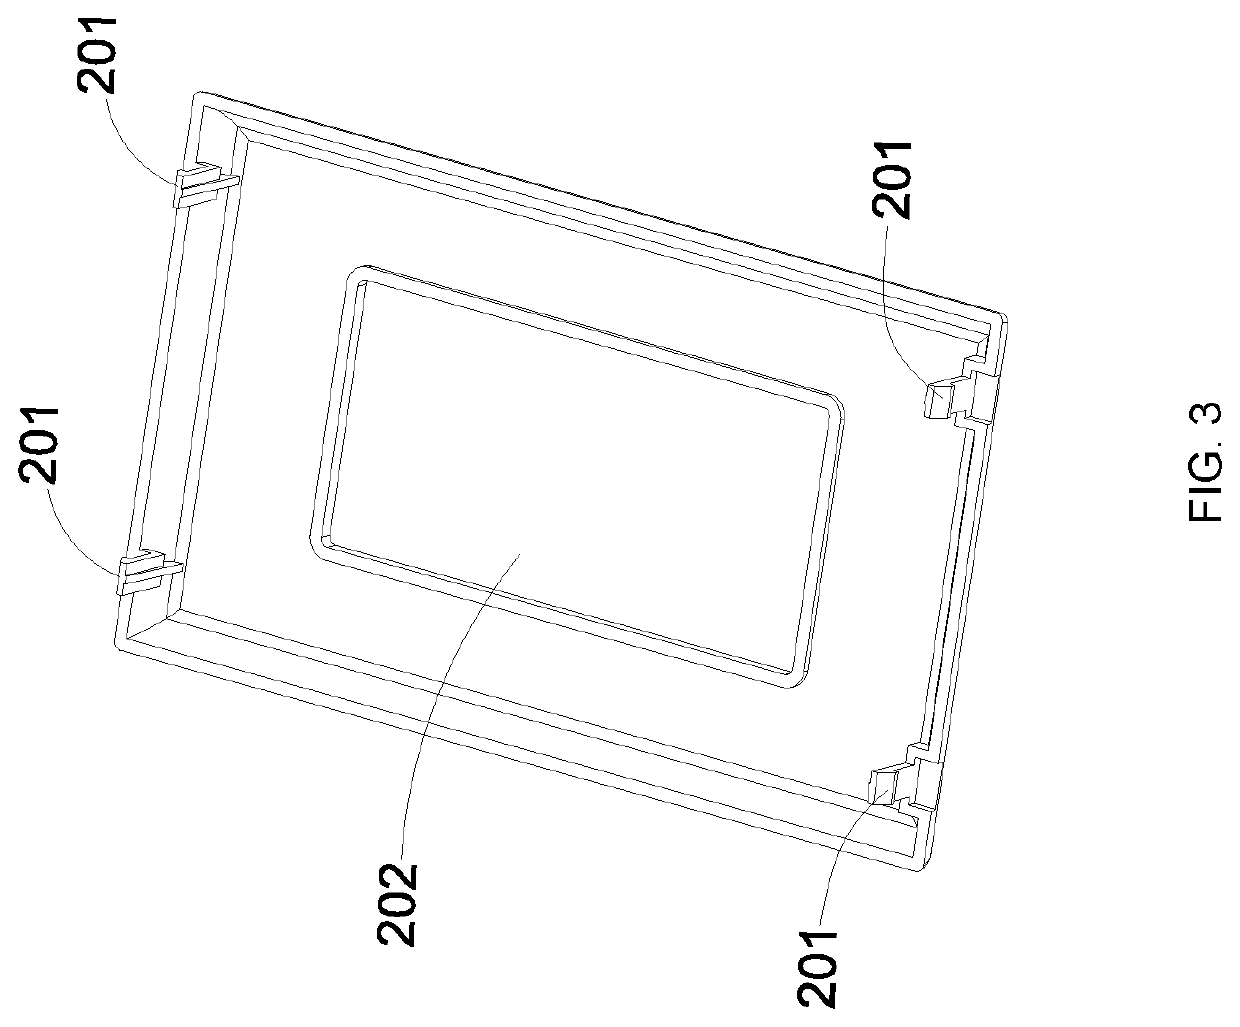 Faceplate for use with a ground fault circuit interrupter device and related gfci assembly